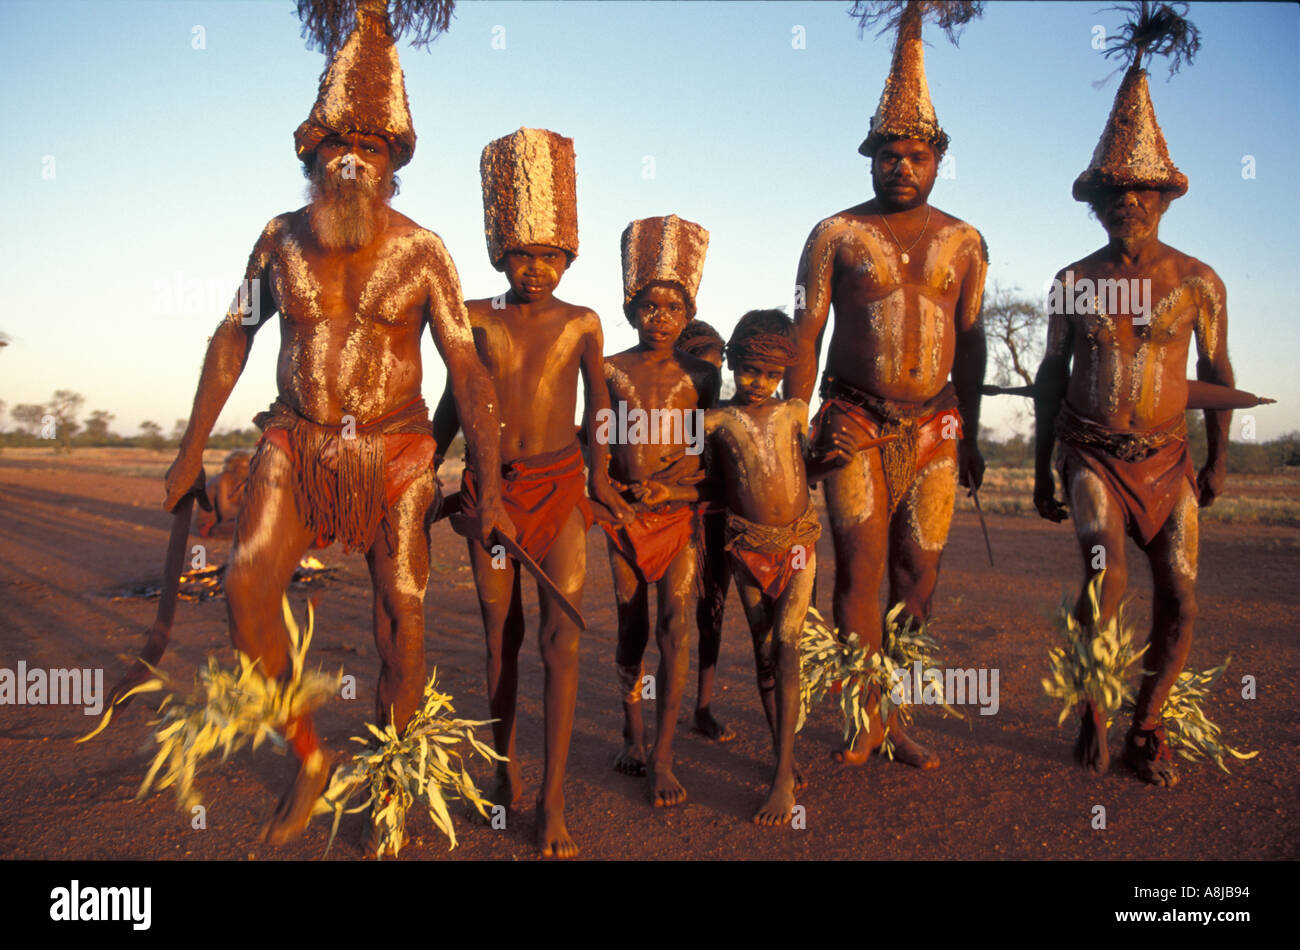 Aboriginal elders teaching boys traditional ceremony business Central Australia bodies painted with red ochre & totem decoration Stock Photo